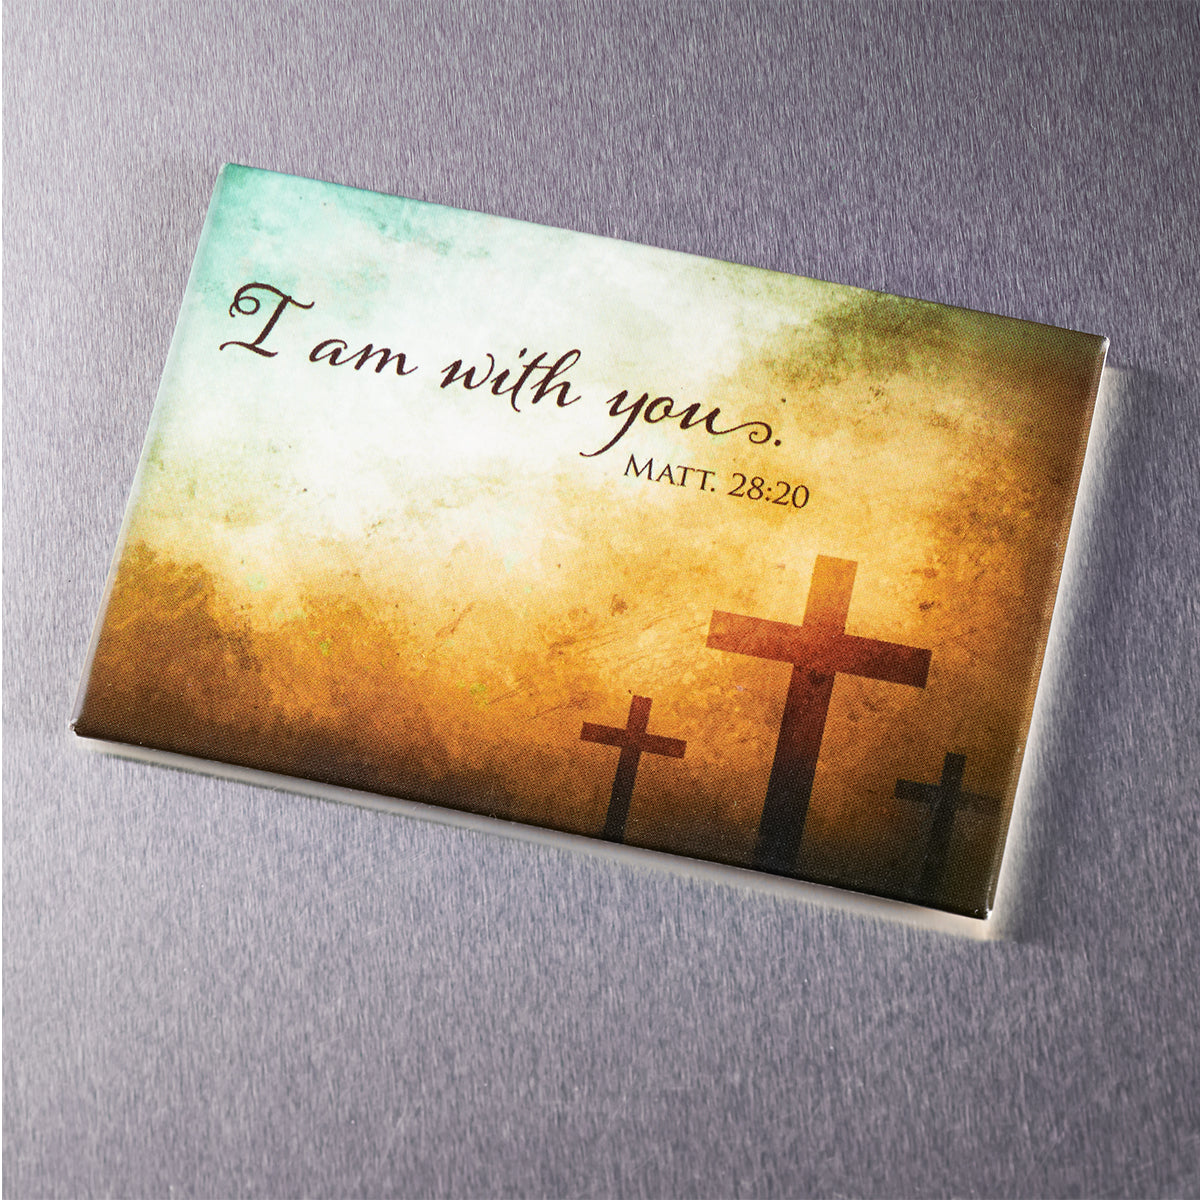 I Am With You Magnet - Matthew 28:20 - The Christian Gift Company